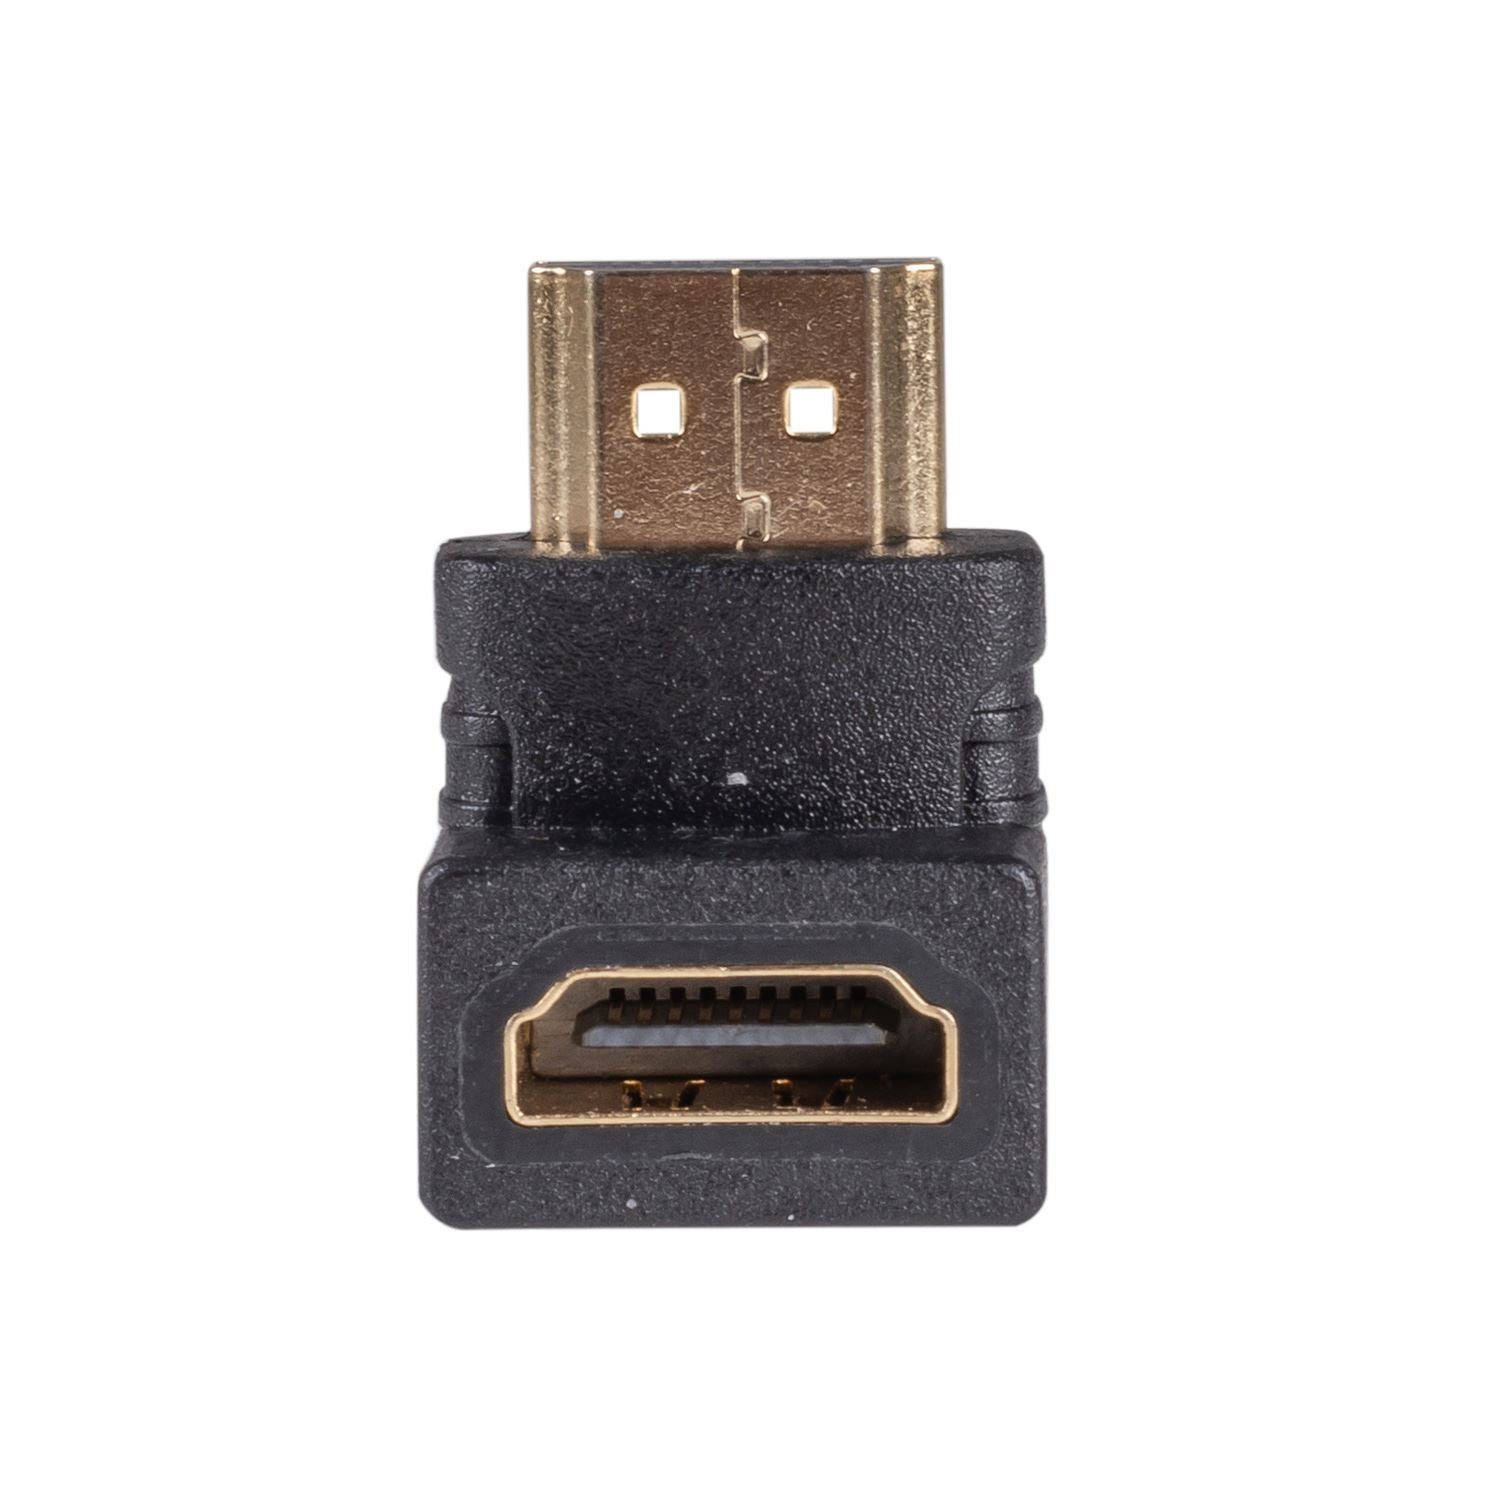 DYNAMIX_HDMI_Down_Angled_Adapter,_High-Speed_with_Ethernet_Gold_Plated_Connectors 72